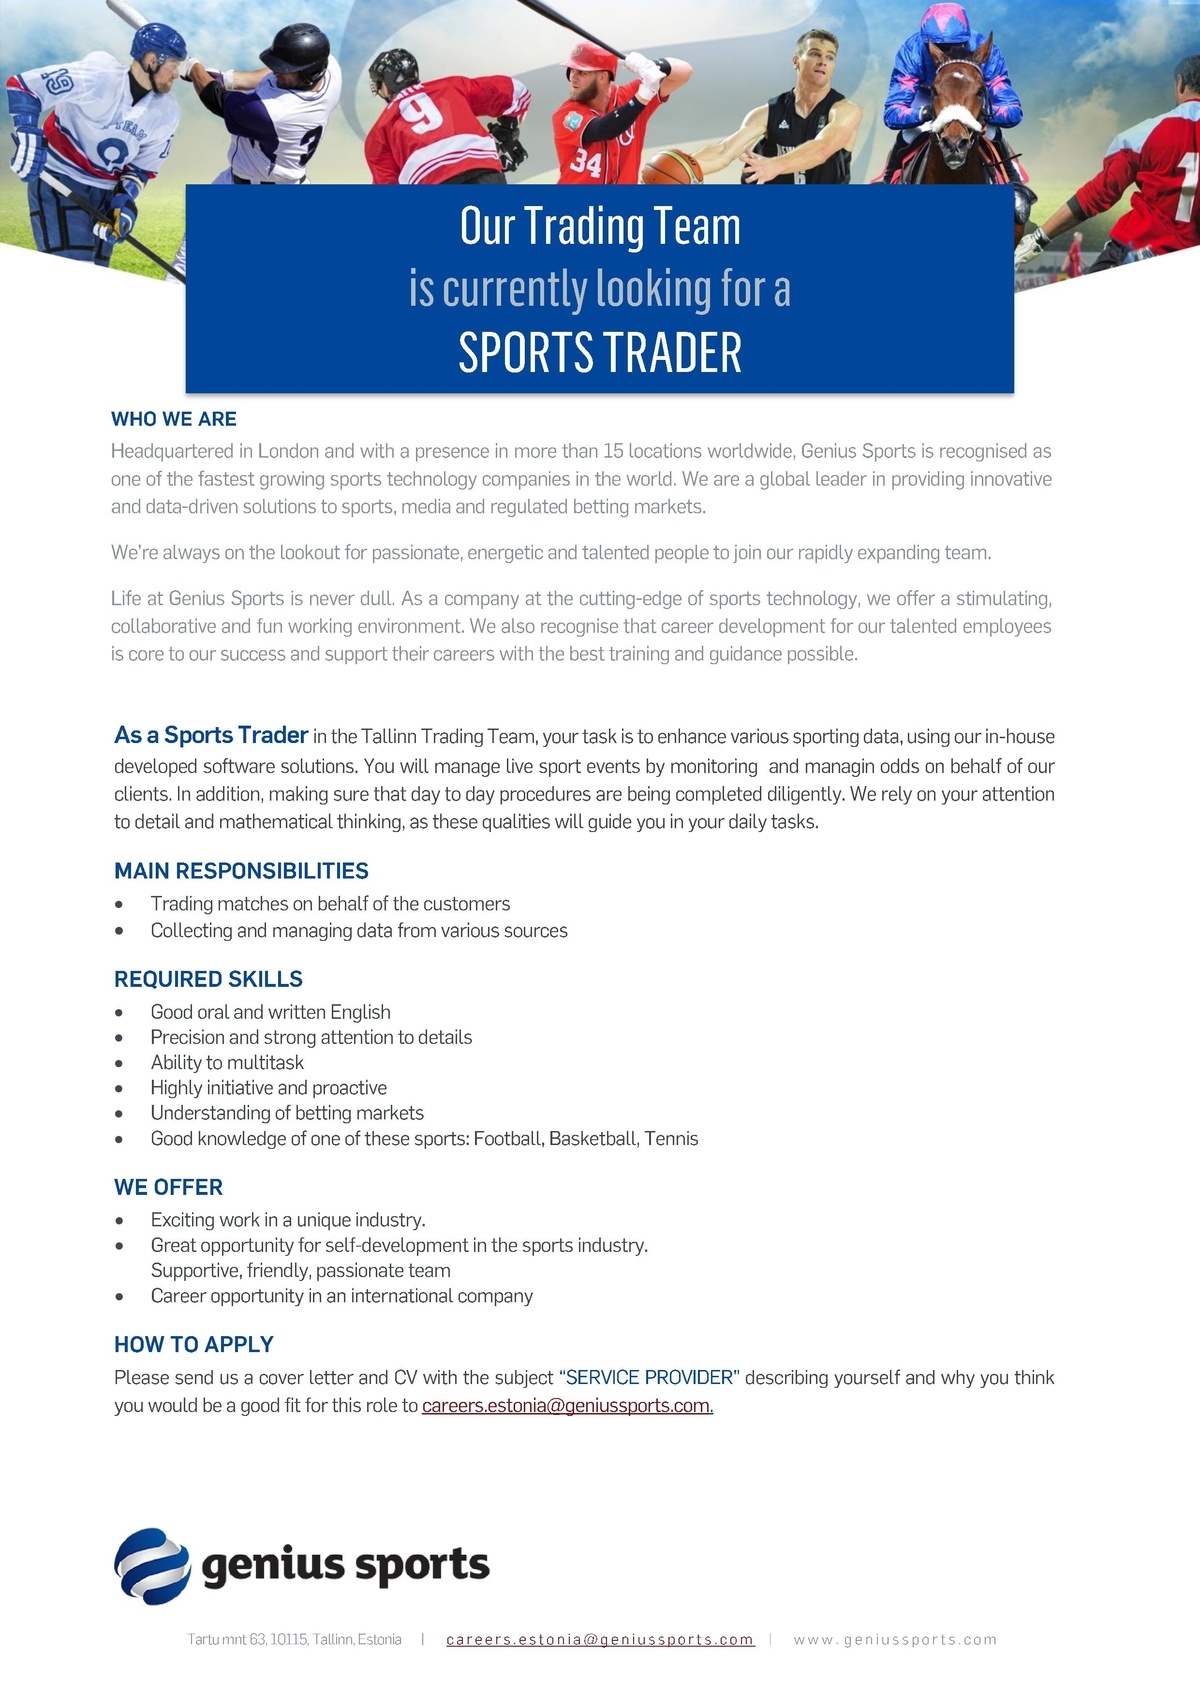 GENIUS SPORTS SERVICES EESTI OÜ SPORTS TRADER (PART-TIME)